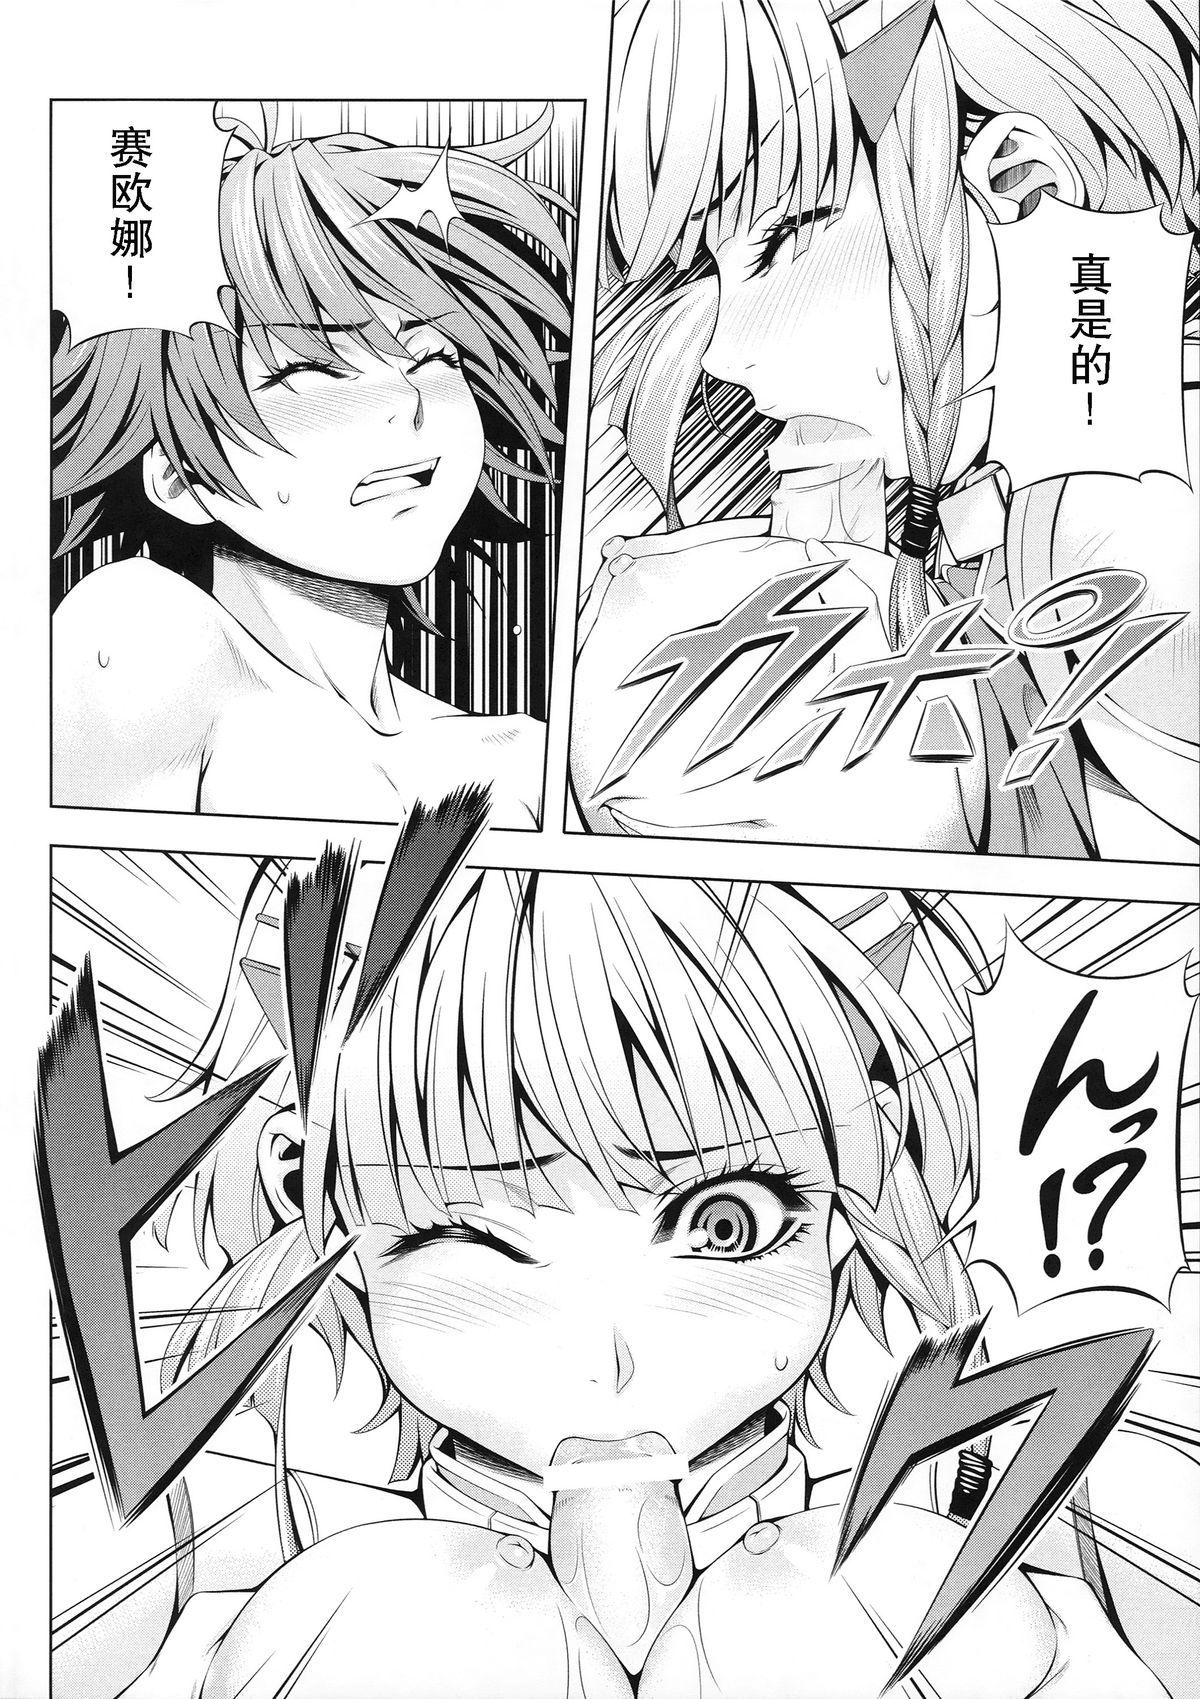 Nipples Seolla of book - Super robot wars Pussy - Page 11